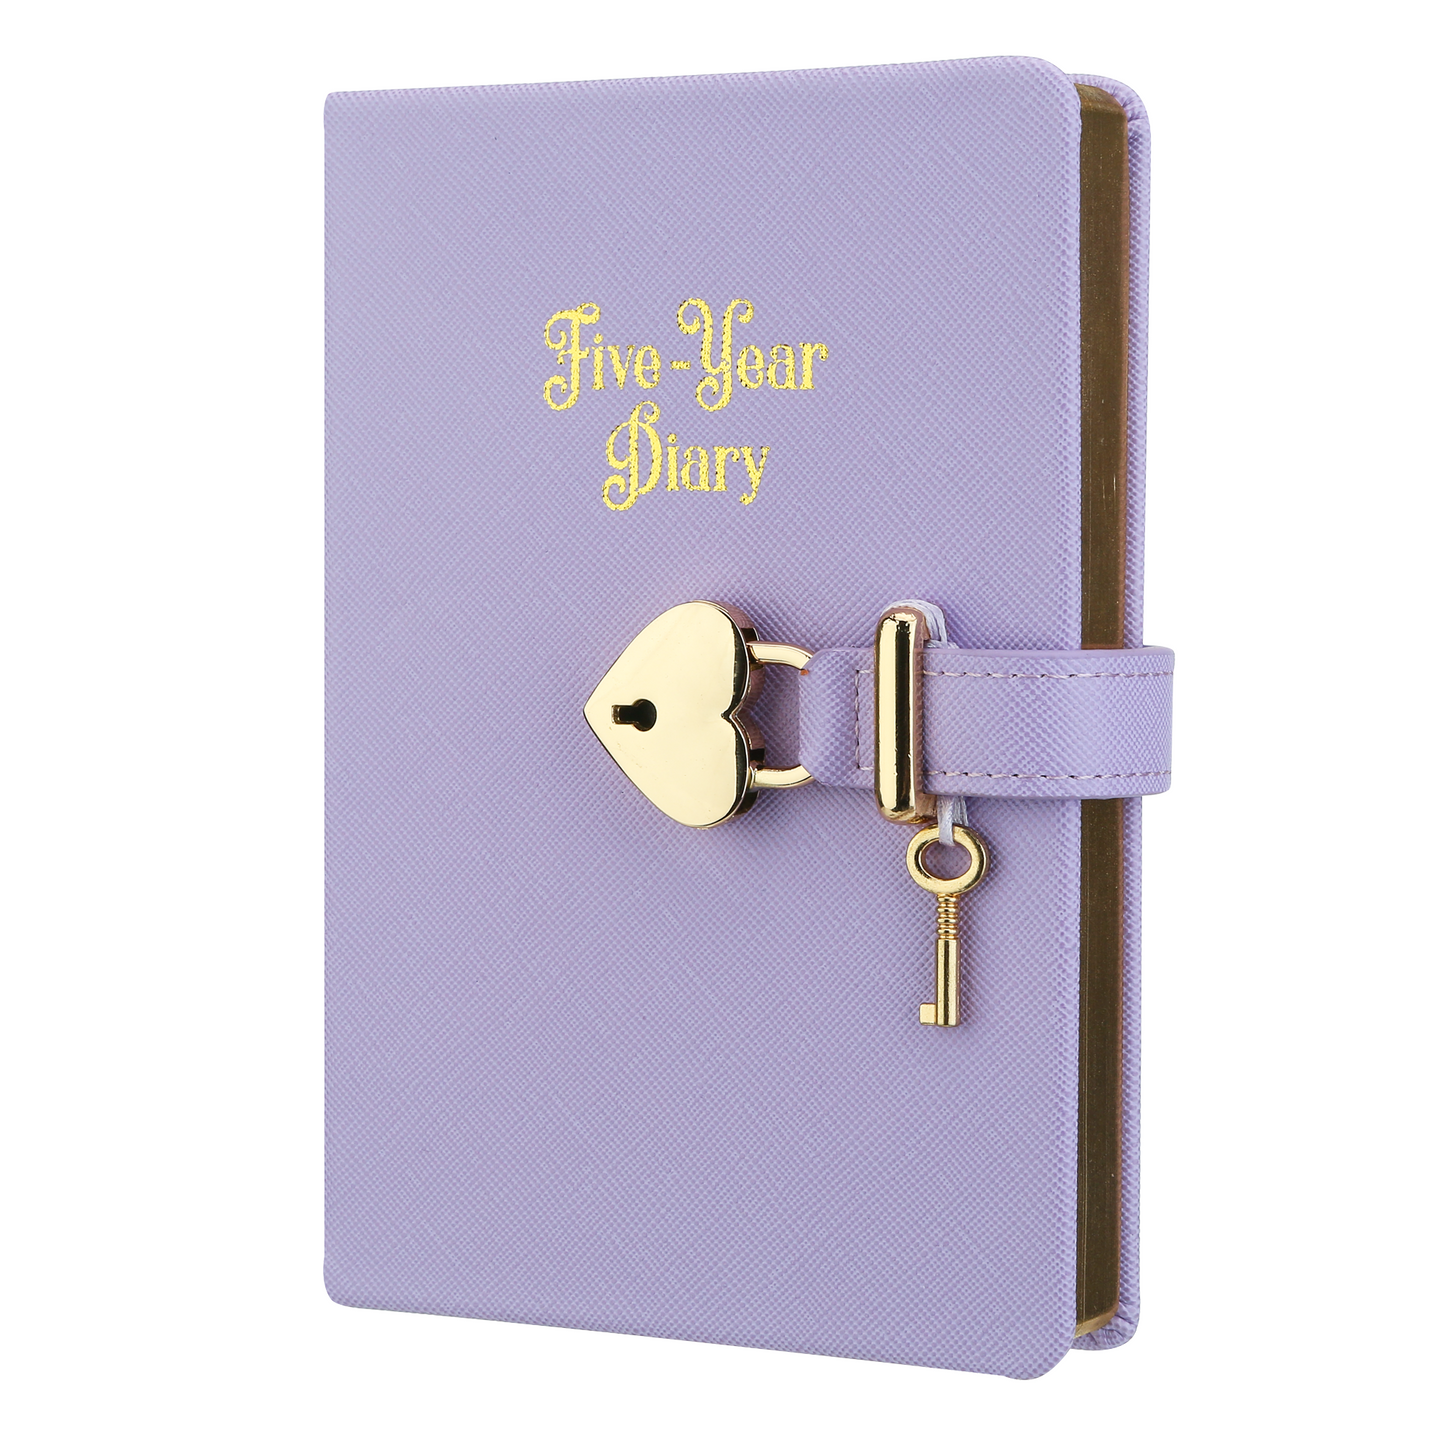 5 Year Diary for Women and Girls: Five-Year Happiness, Memory and Daily Journal with Heart Lock - 4.7x6.5", 394pages (Lilac)